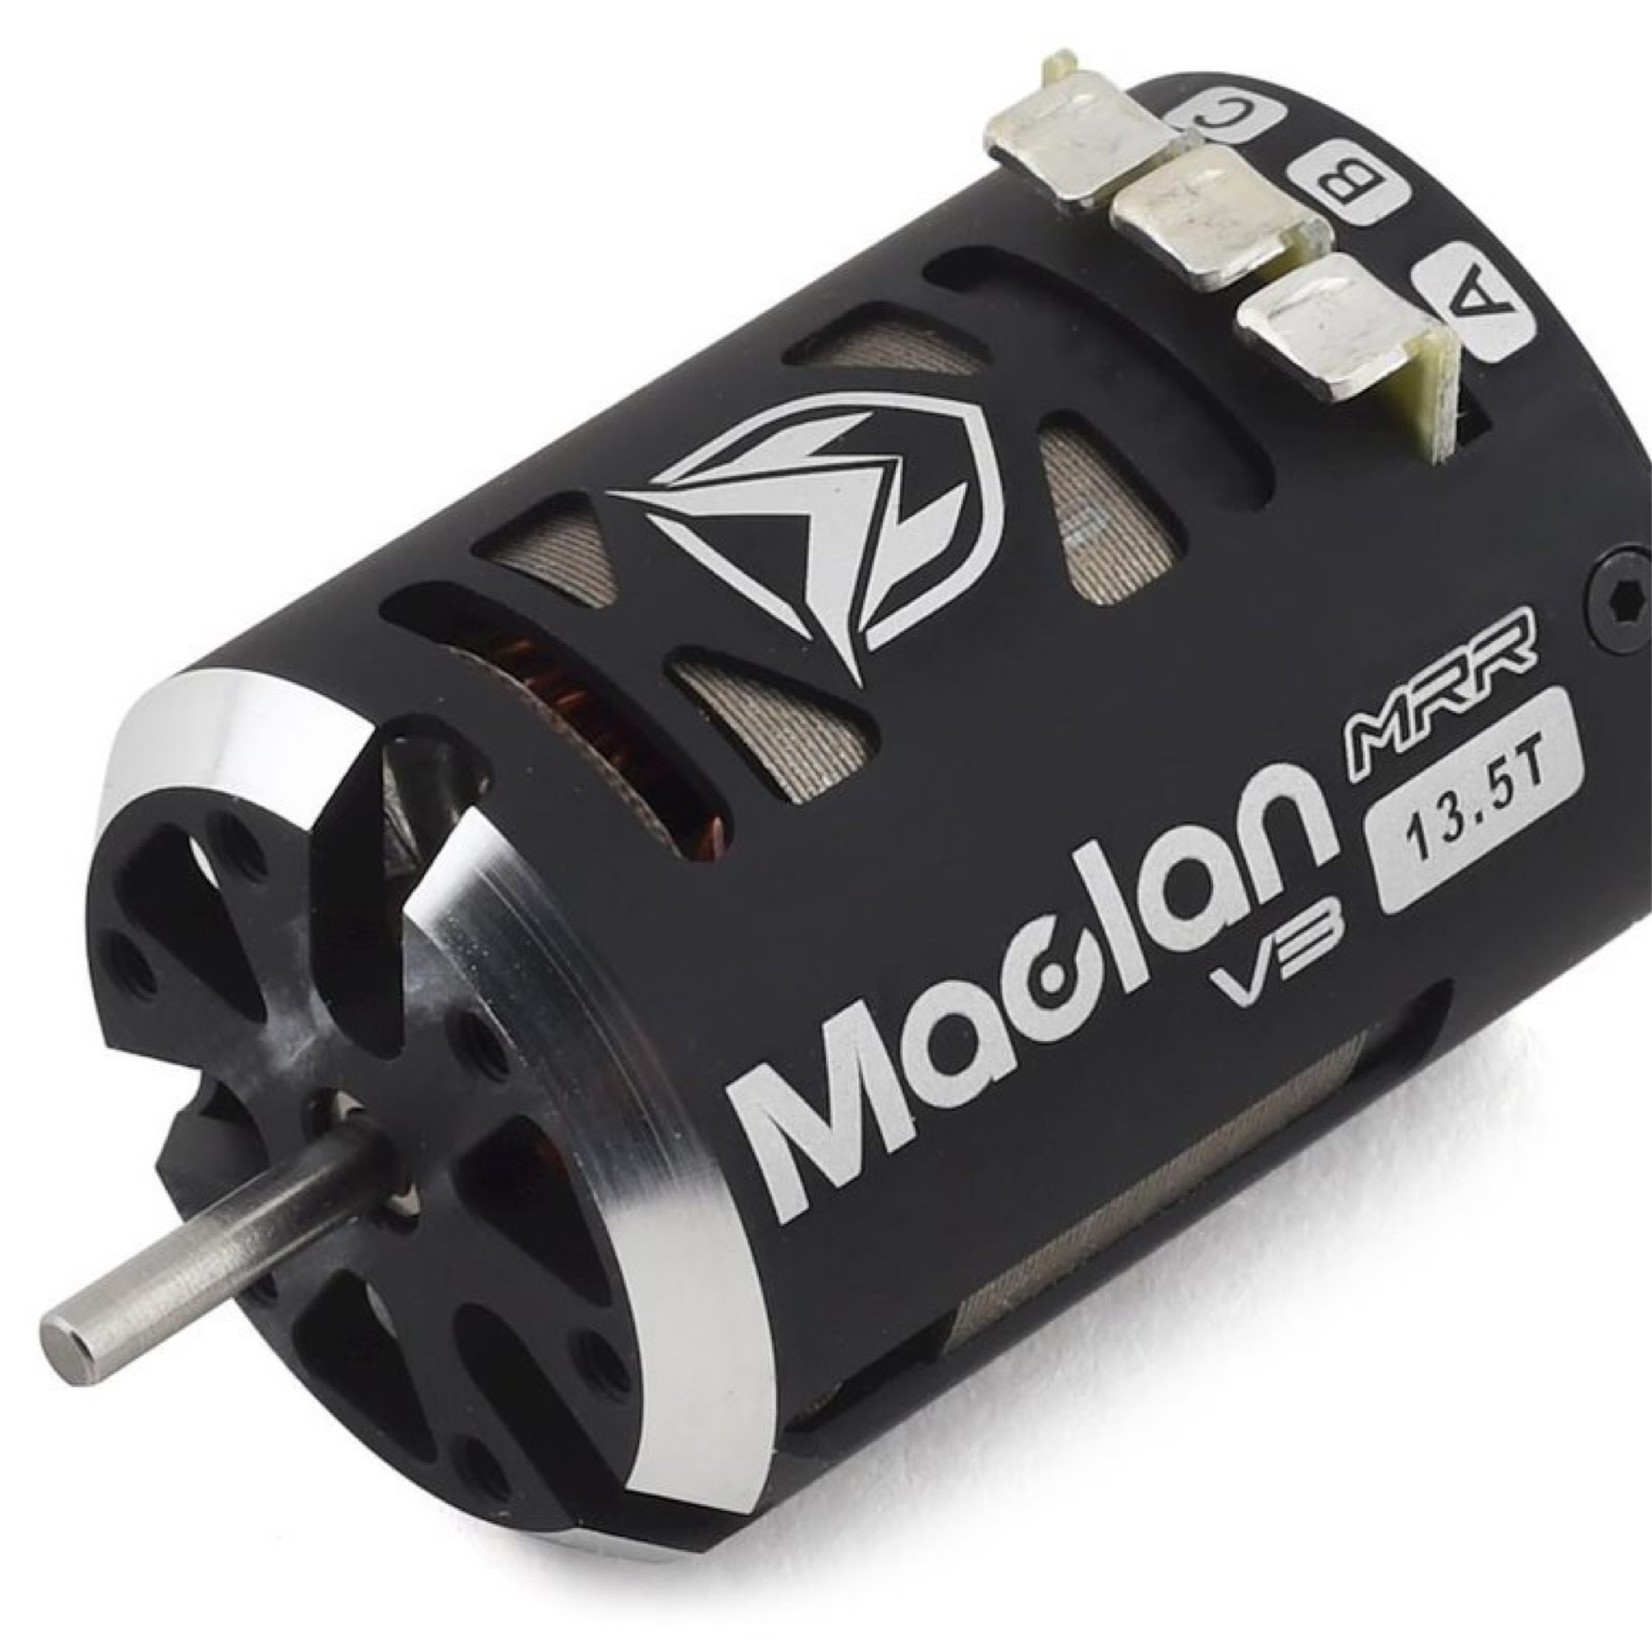 Maclan Maclan MRR V3 Competition Sensored Brushless Motor (13.5T) #MCL1050